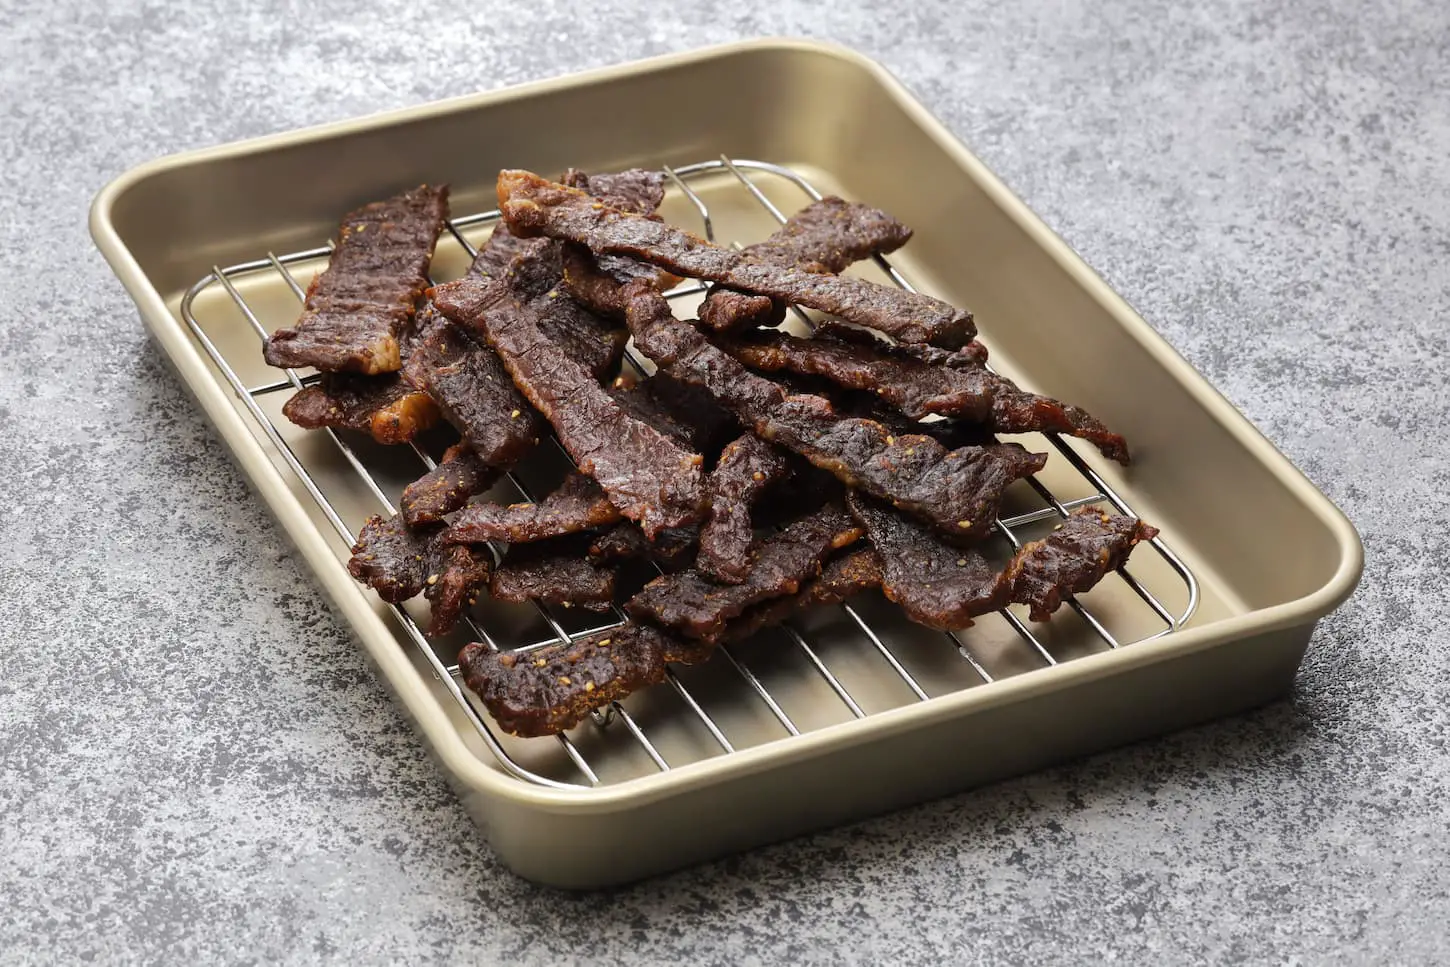 Can You Make Jerky In a Freeze Dryer?